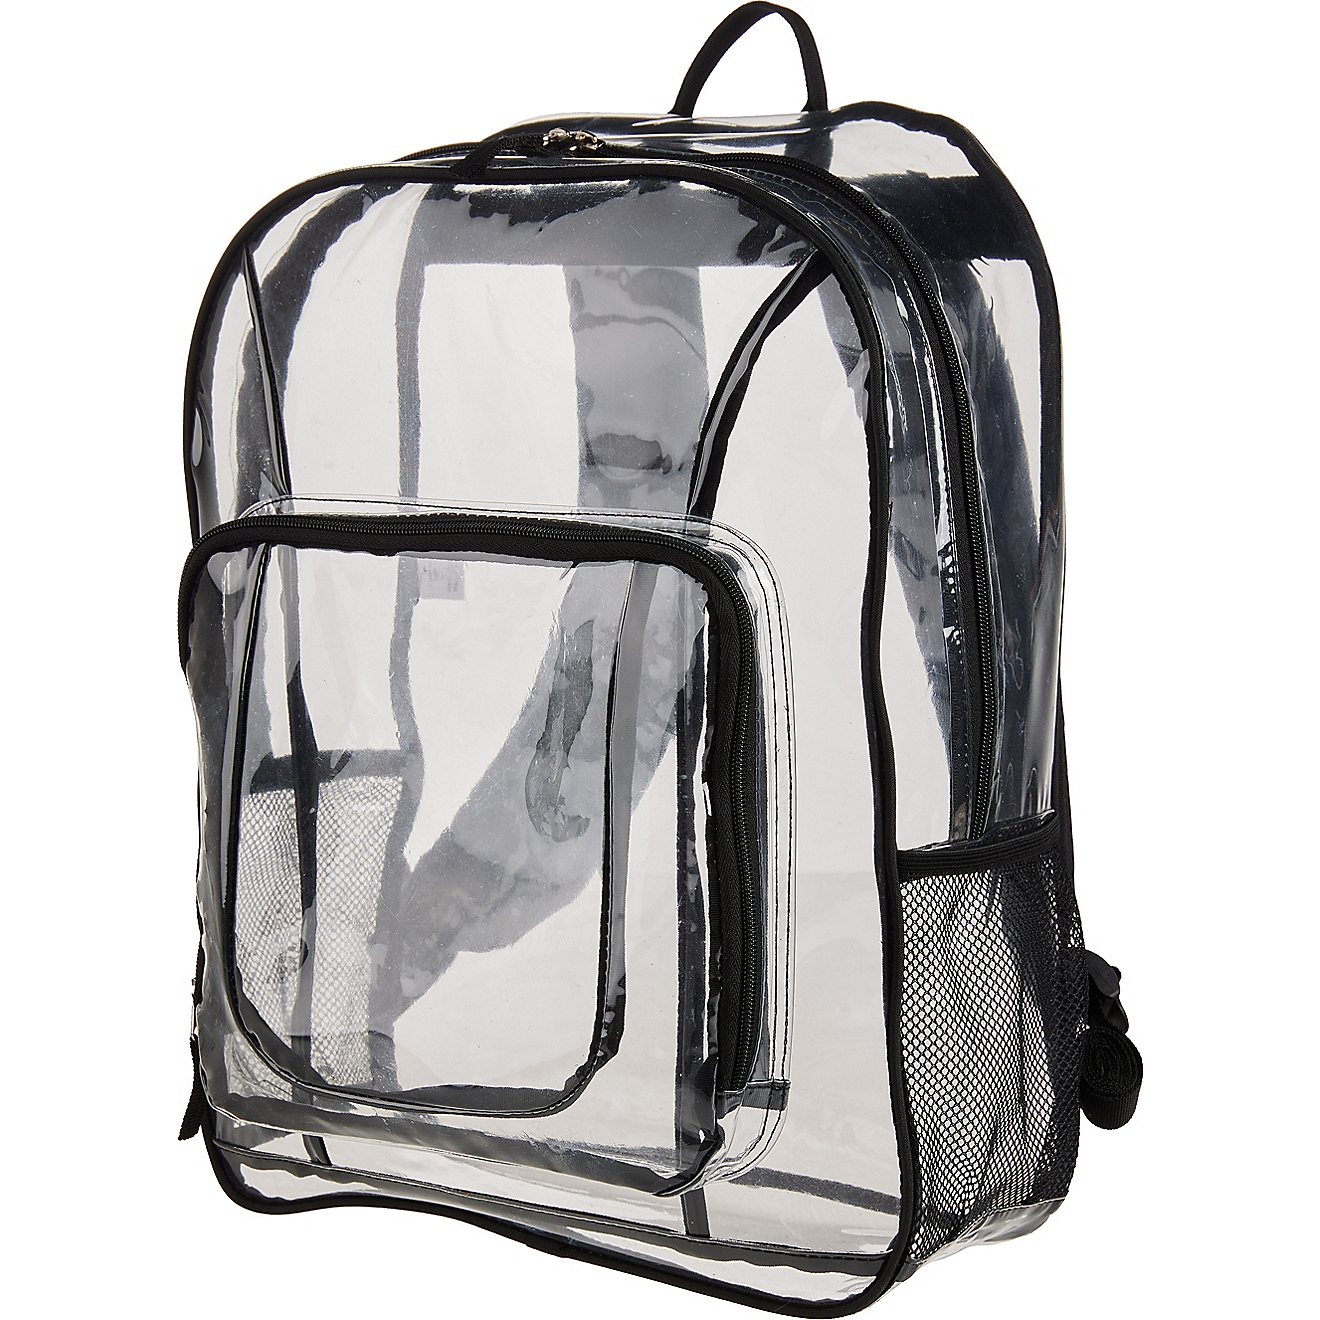 Academy Sports + Outdoors Clear Backpack                                                                                         - view number 2